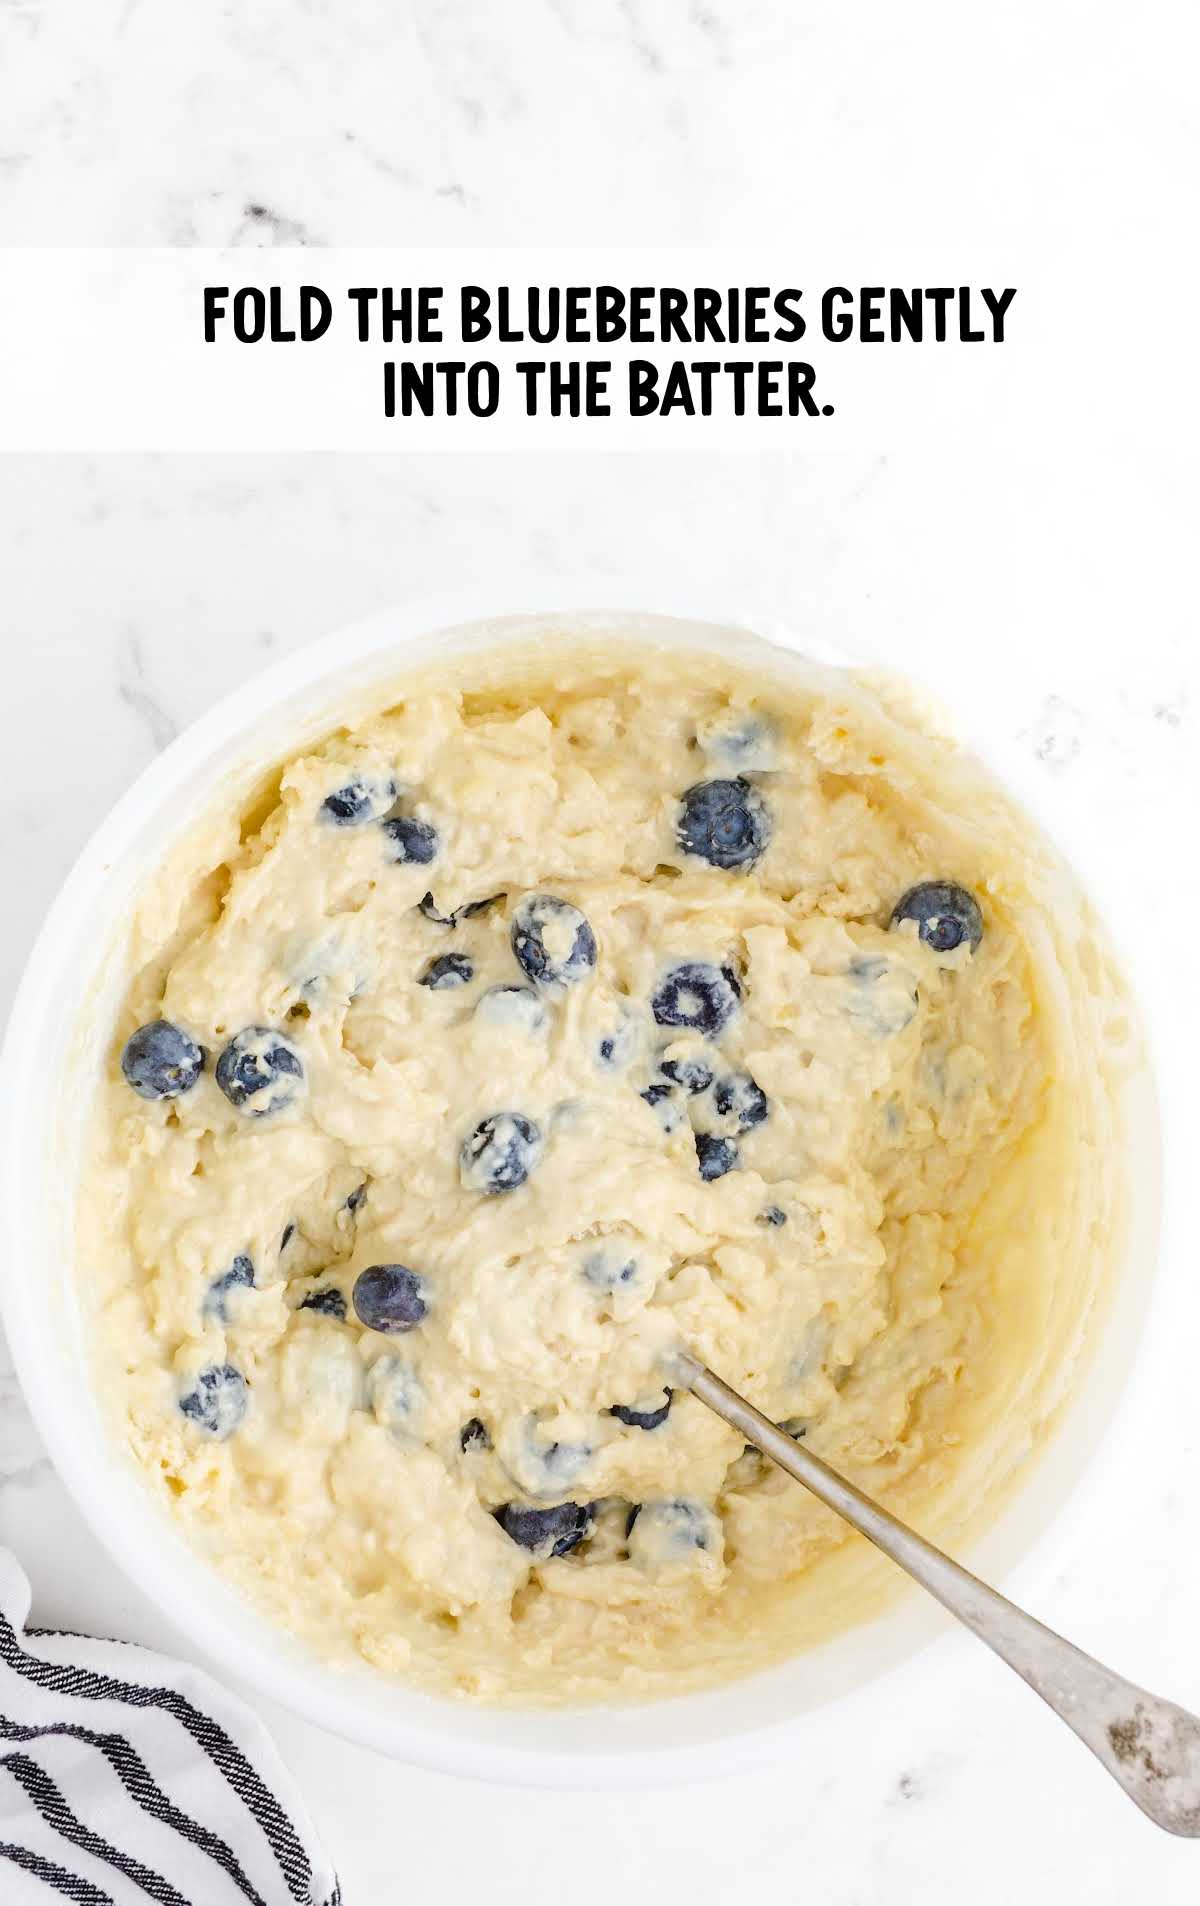 blueberries folded into the batter